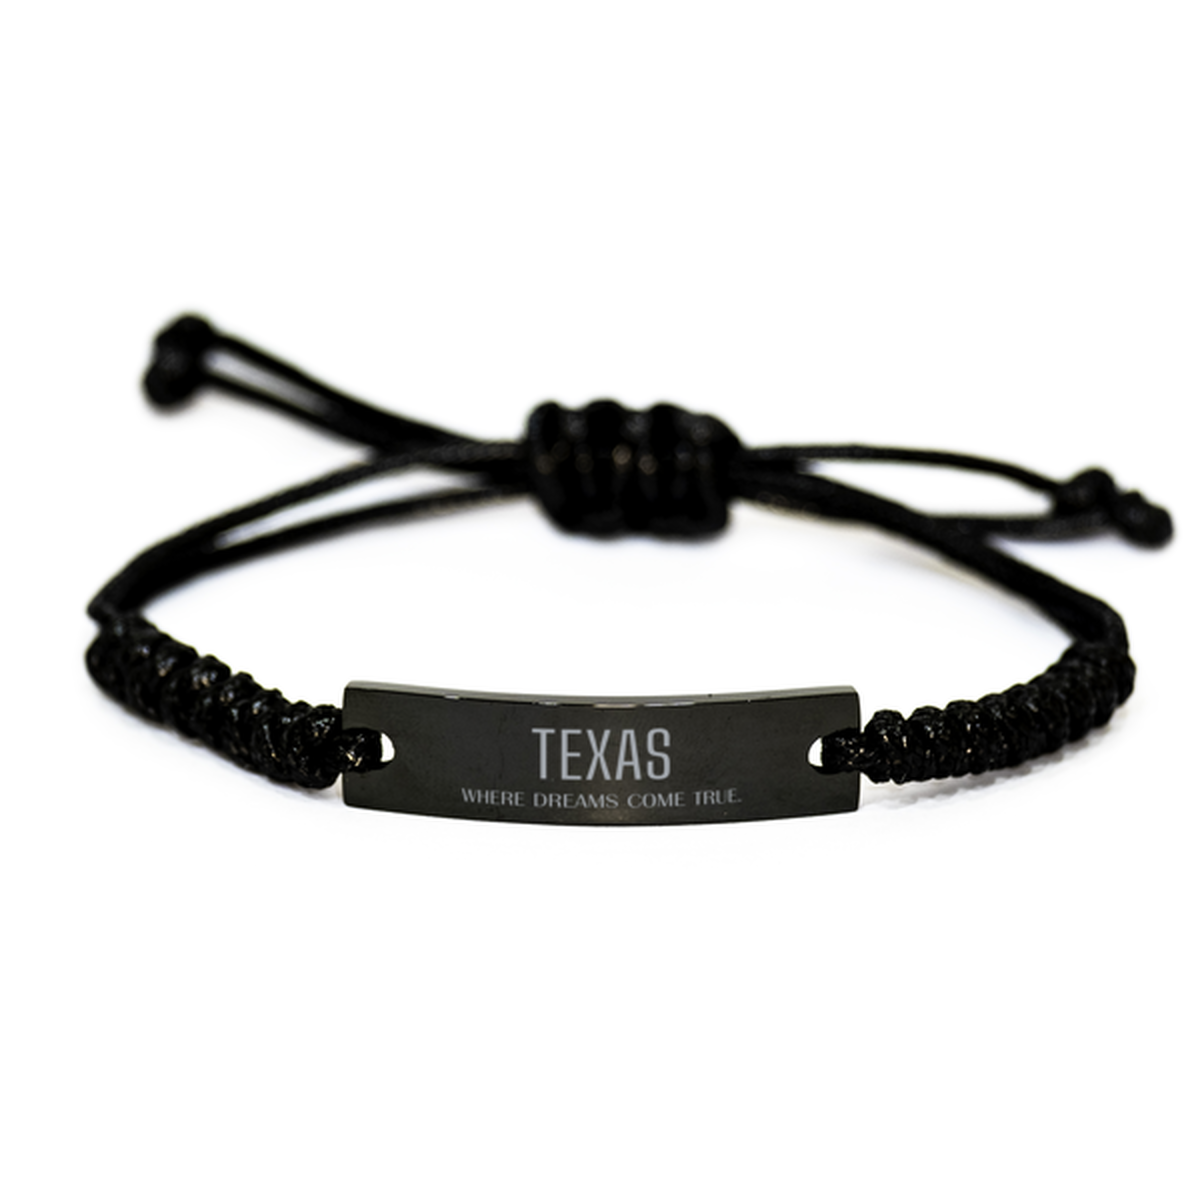 Love Texas State Black Rope Bracelet, Texas Where dreams come true, Birthday Inspirational Gifts For Texas Men, Women, Friends